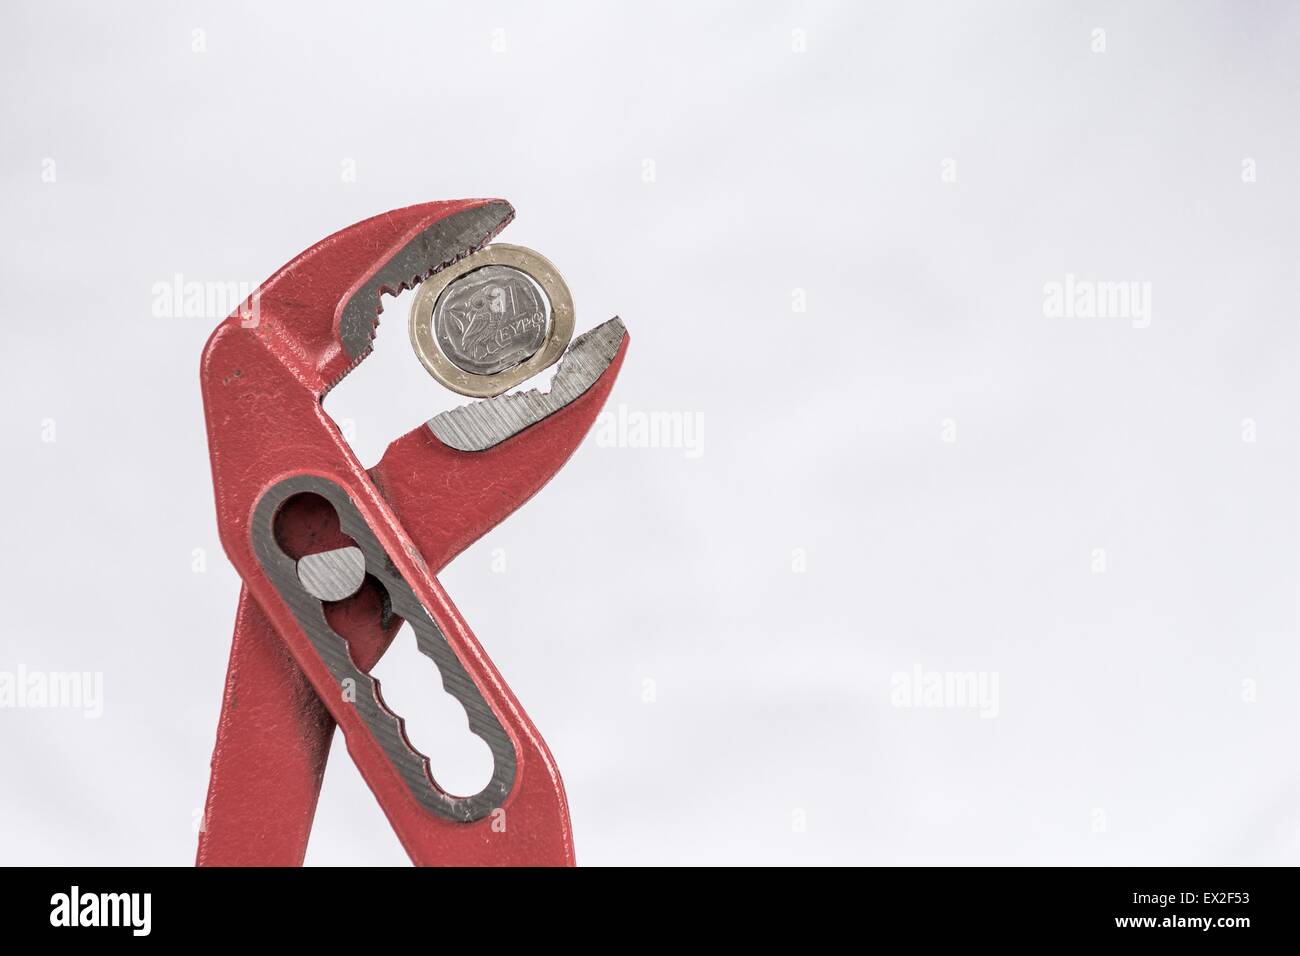 Greek Euro coin squezzed with pliers. Stock Photo